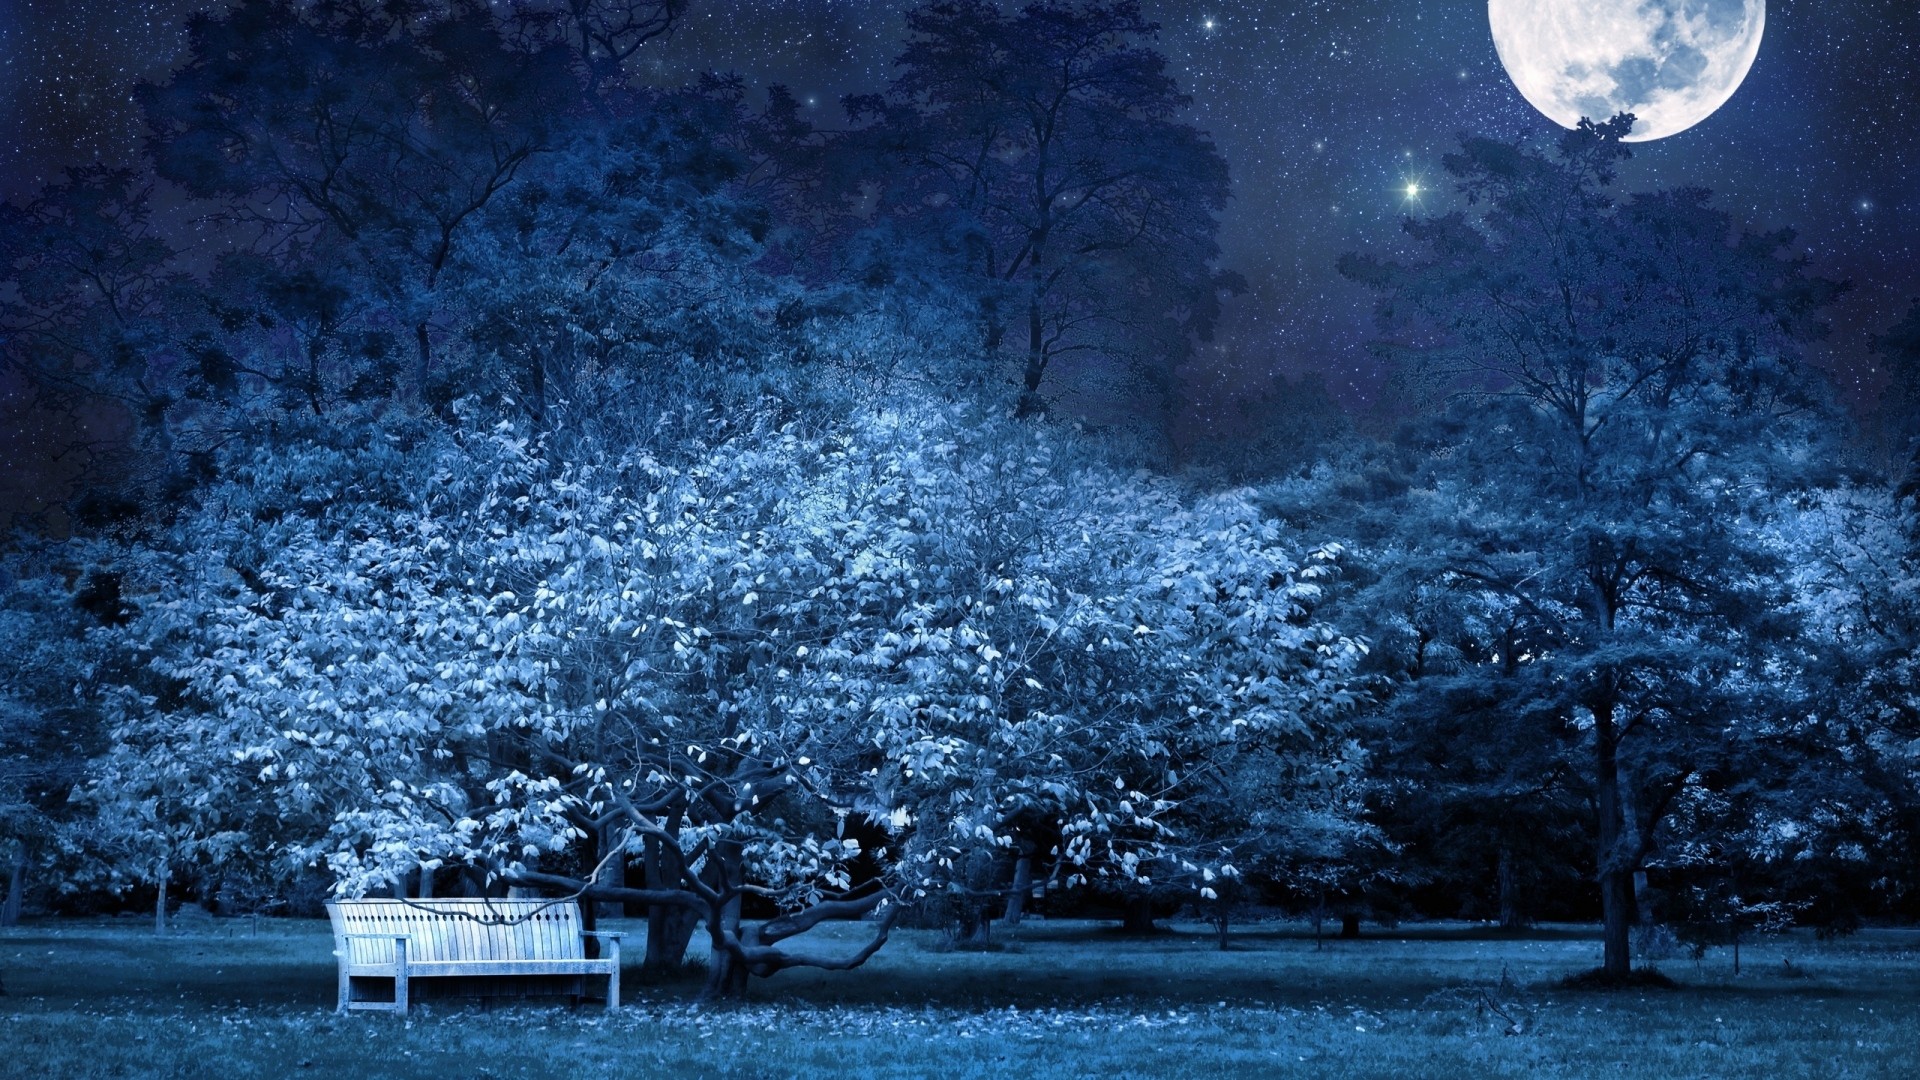 1920x1080 1920 x 1200 px widescreen wallpaper night by Aiken Cook for: TrunkWeed